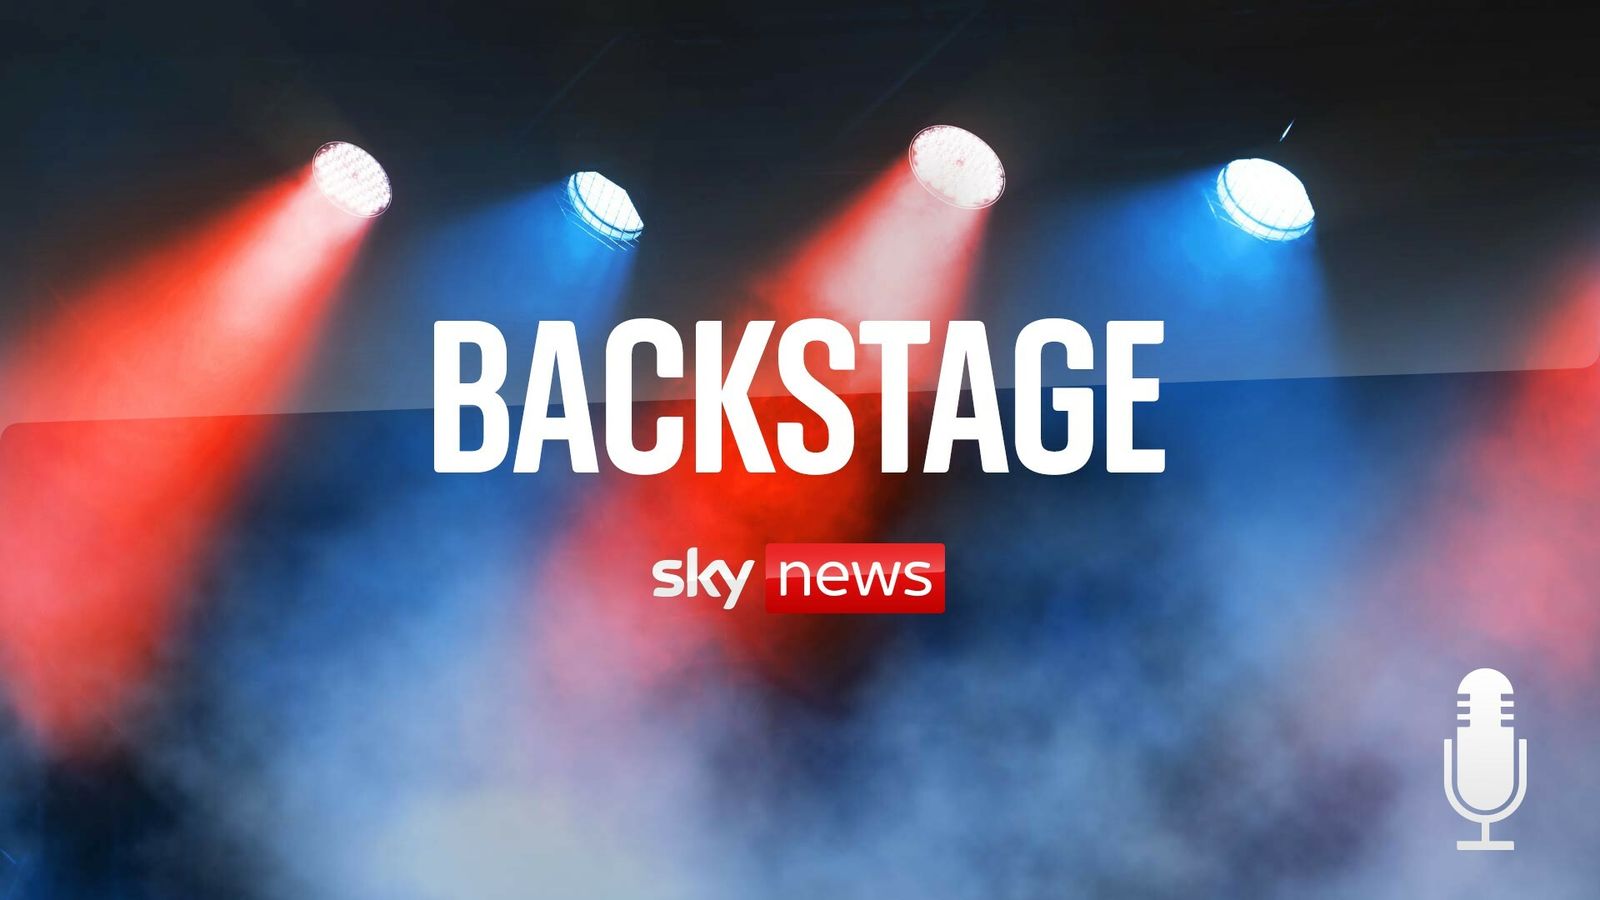 Backstage podcast: Lily Allen and Freema Agyeman, Obsession, Sam Neill, and Guy Ritchie